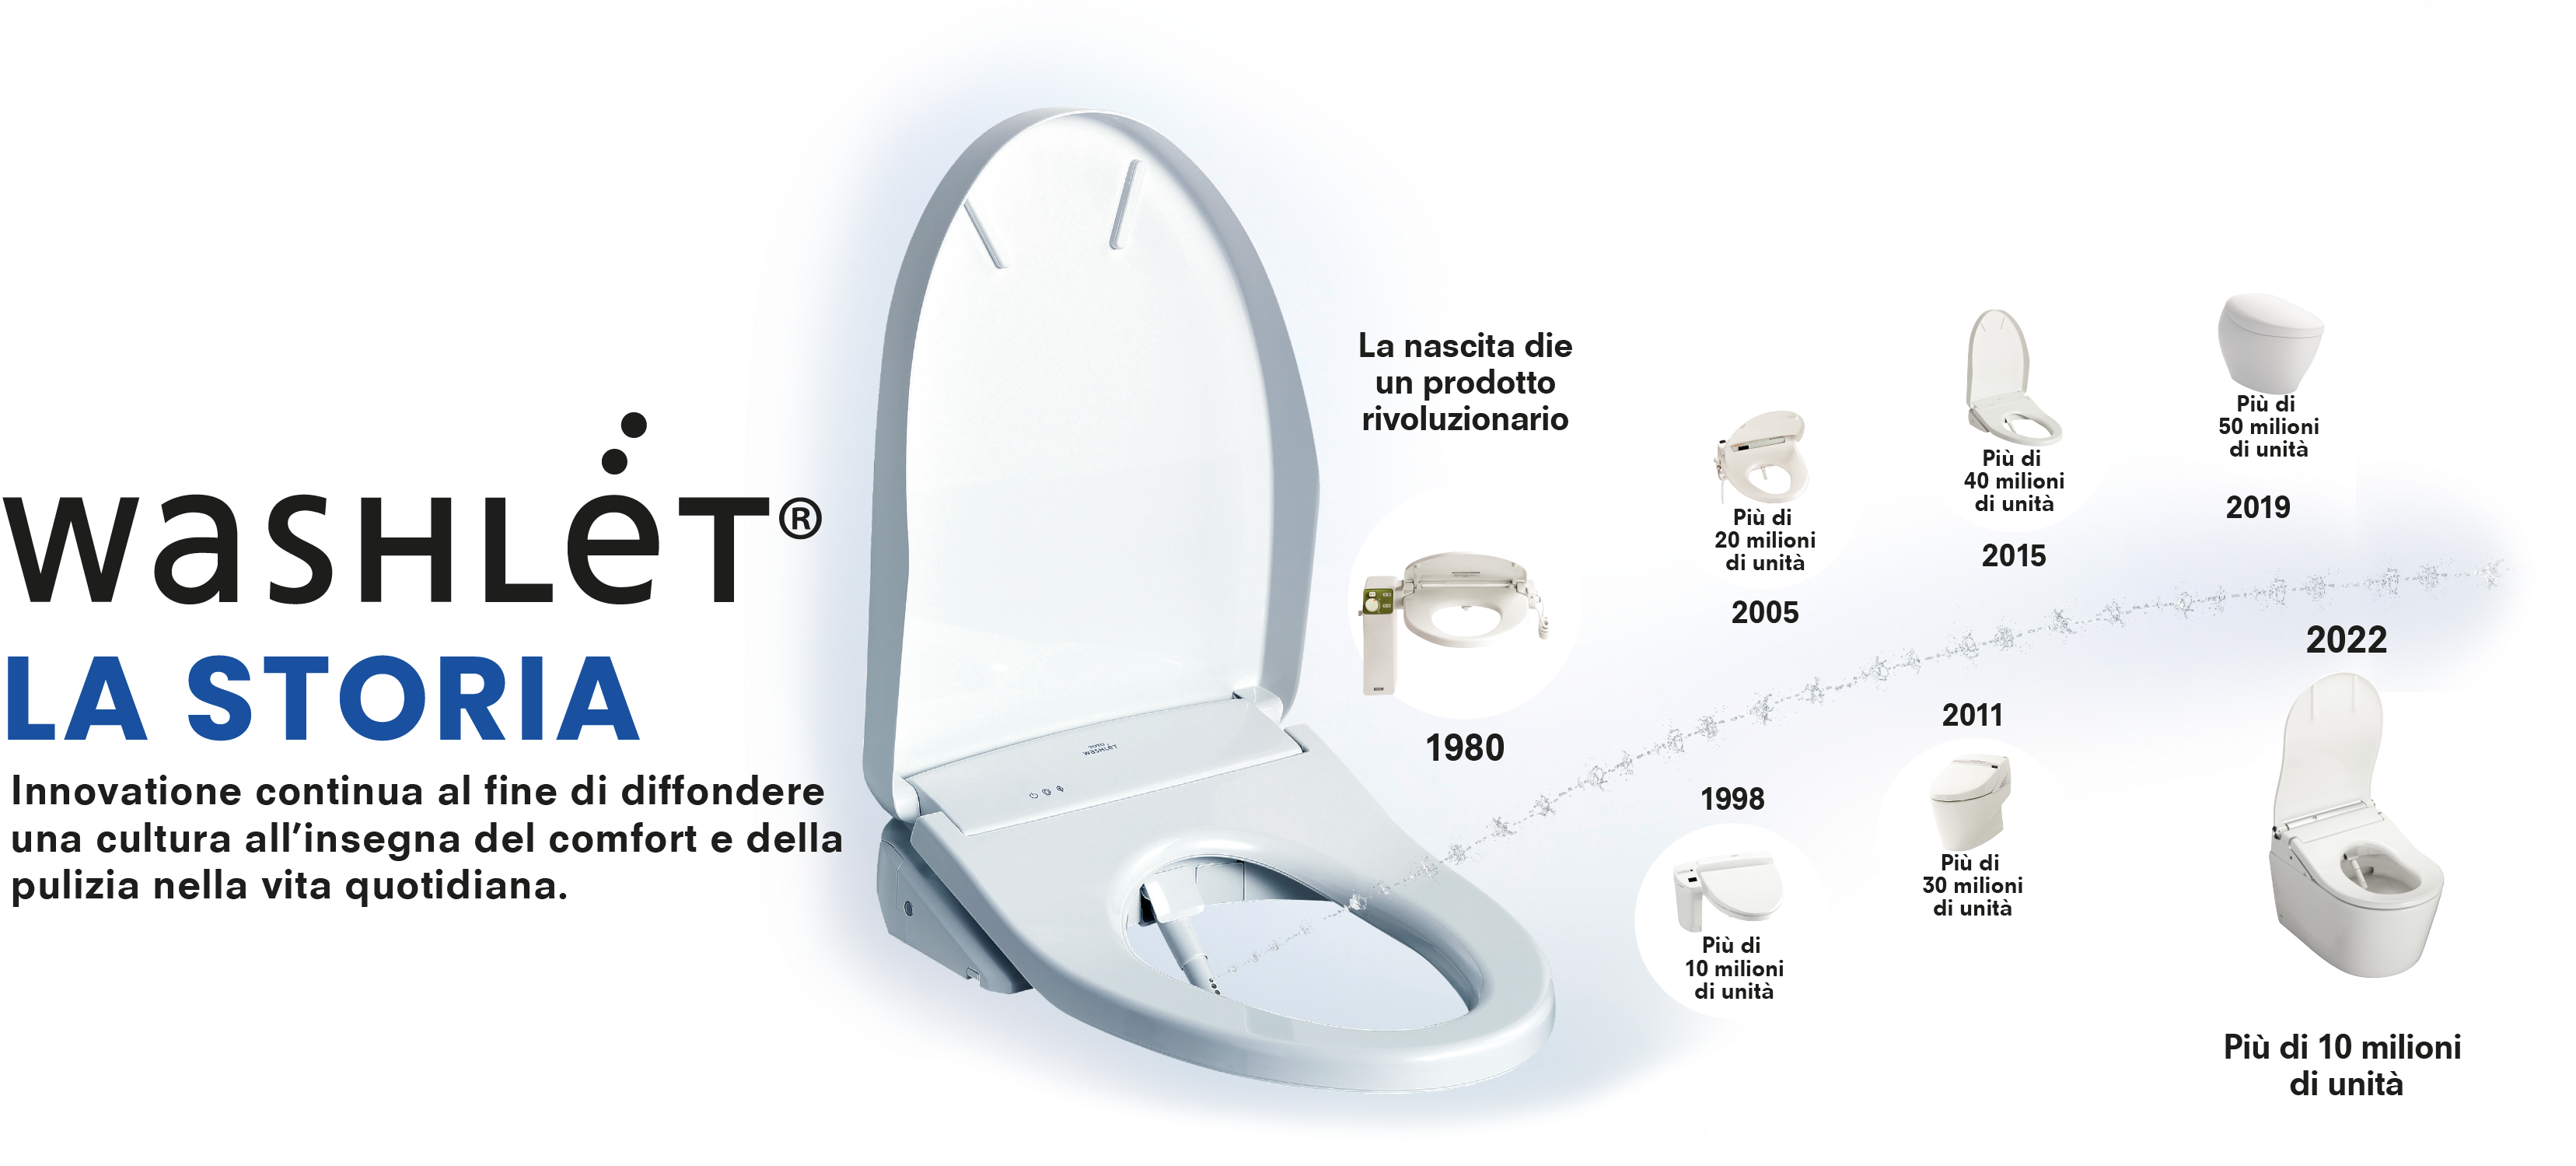 WASHLET HISTORY Always Innovating to Spread a Culture of Everyday Comfort and Cleanliness.